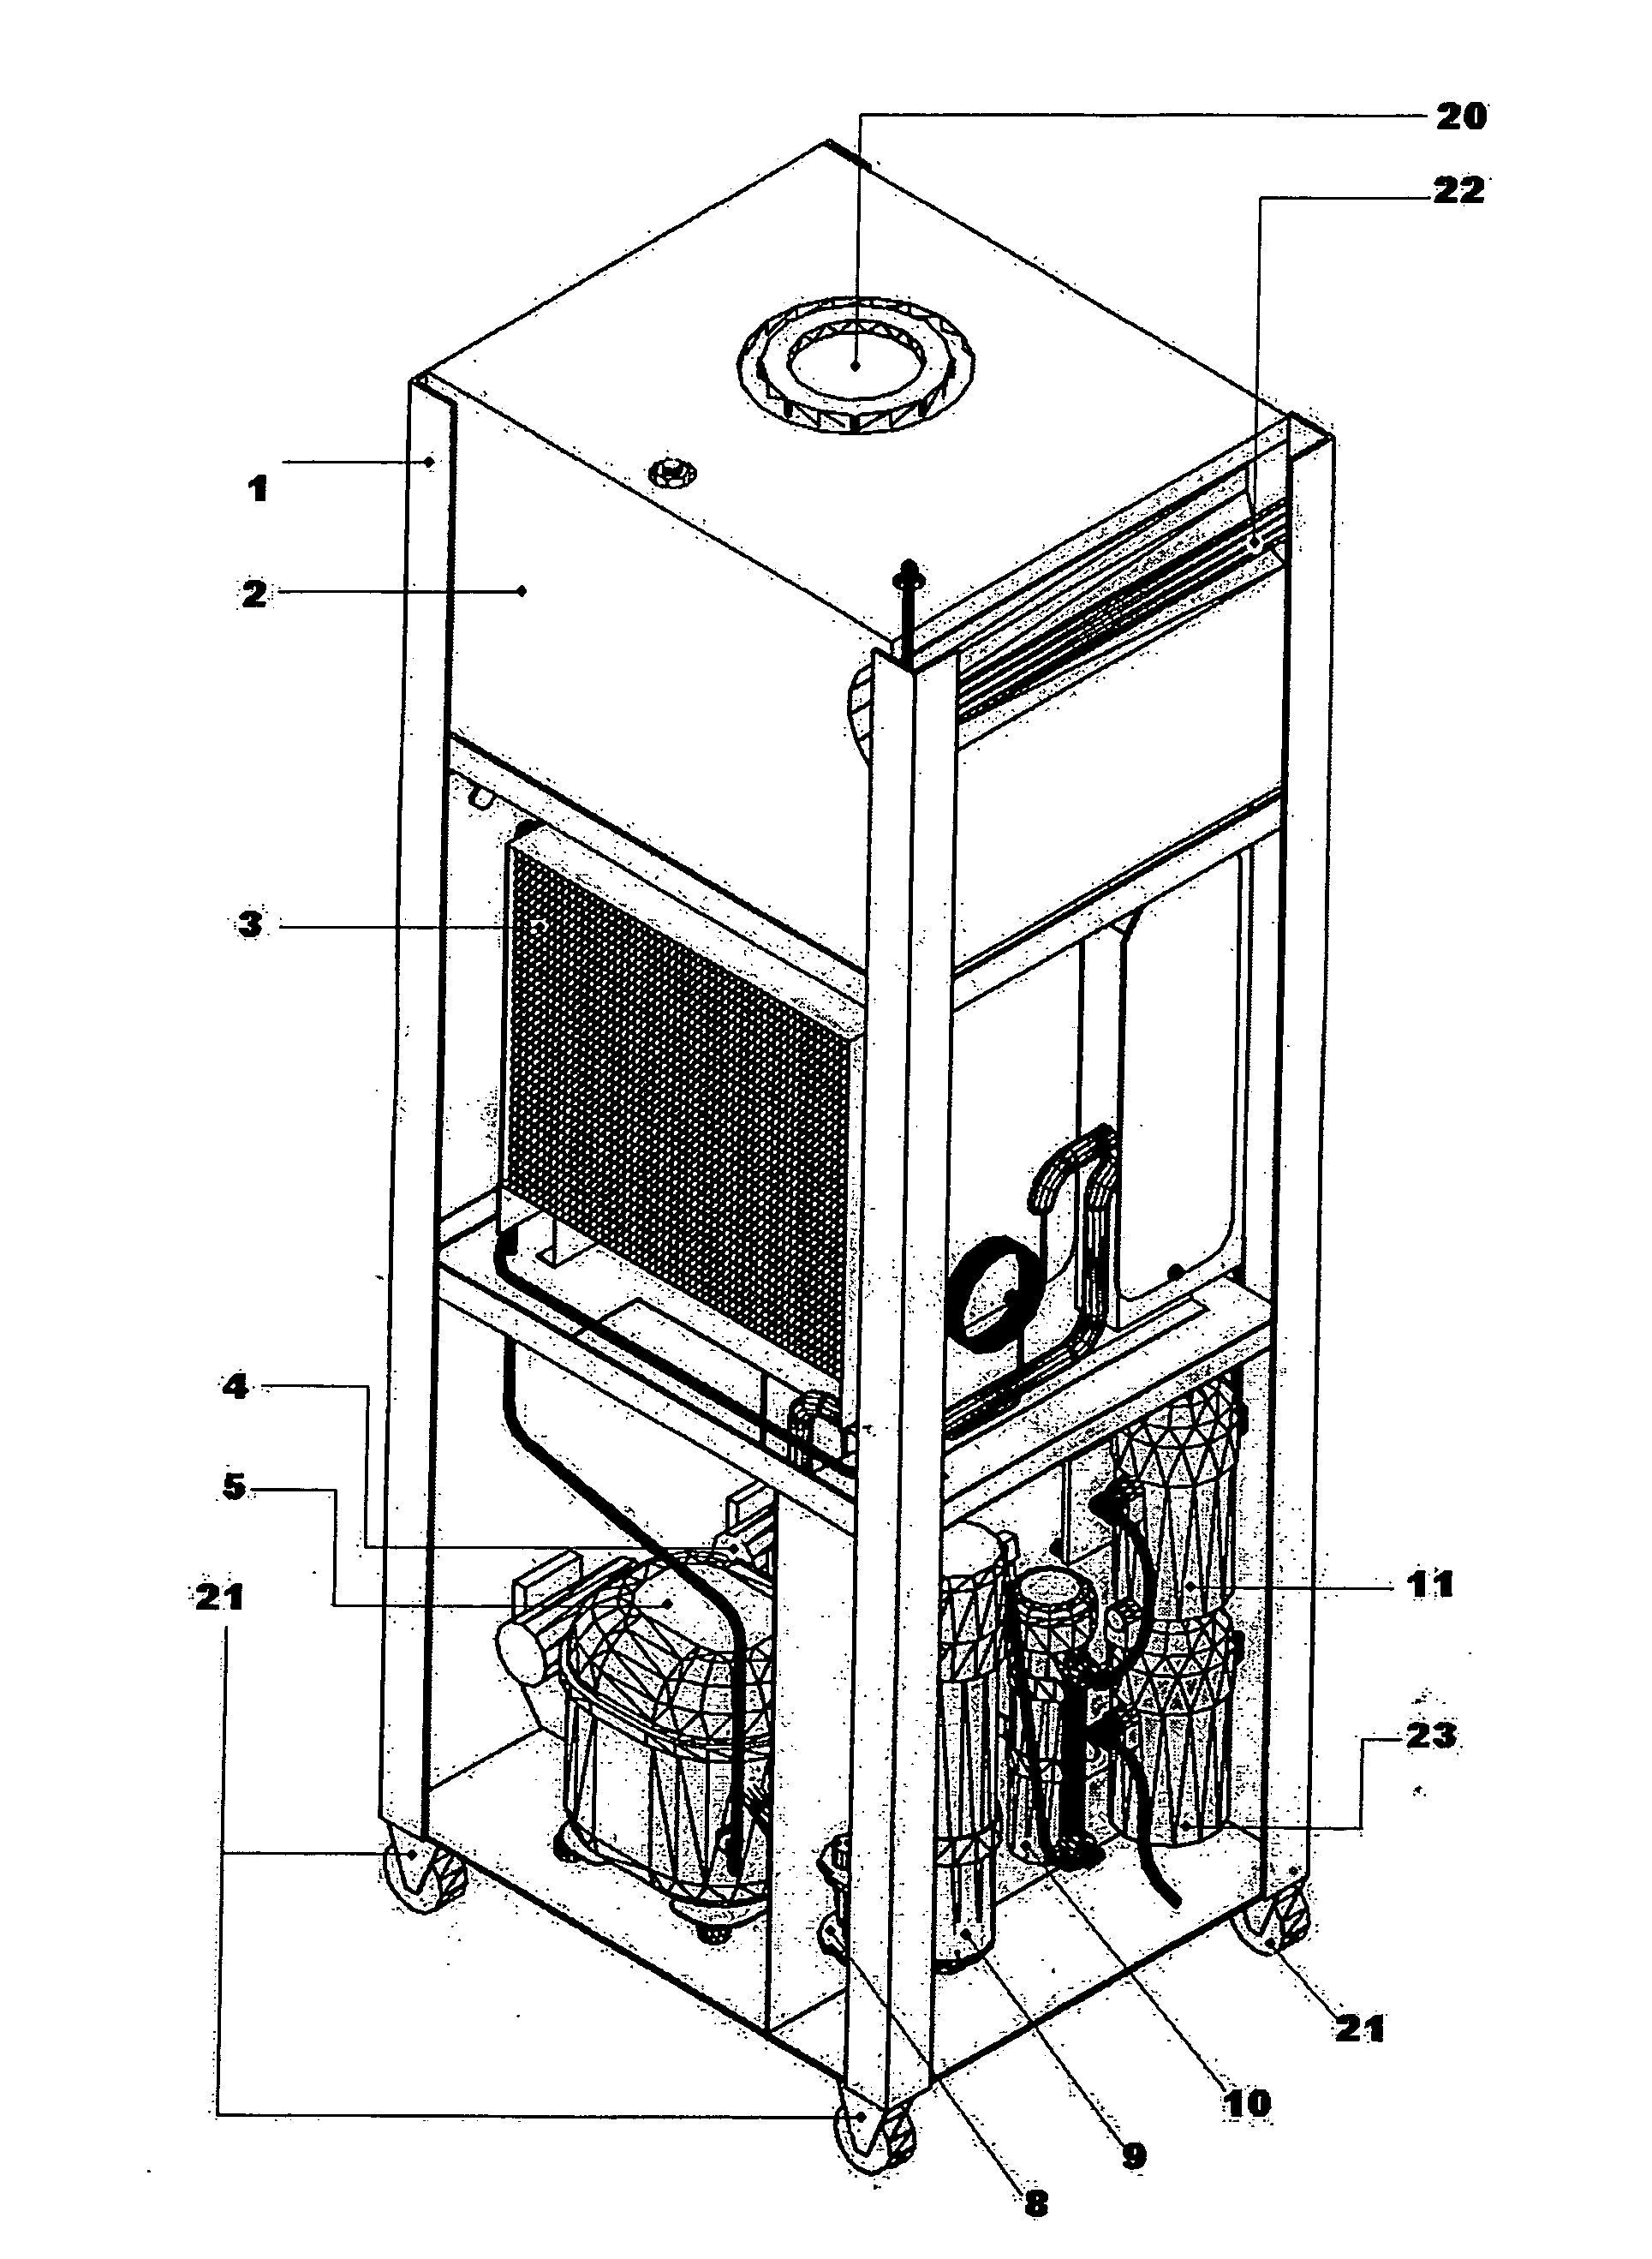 Condensed water production system